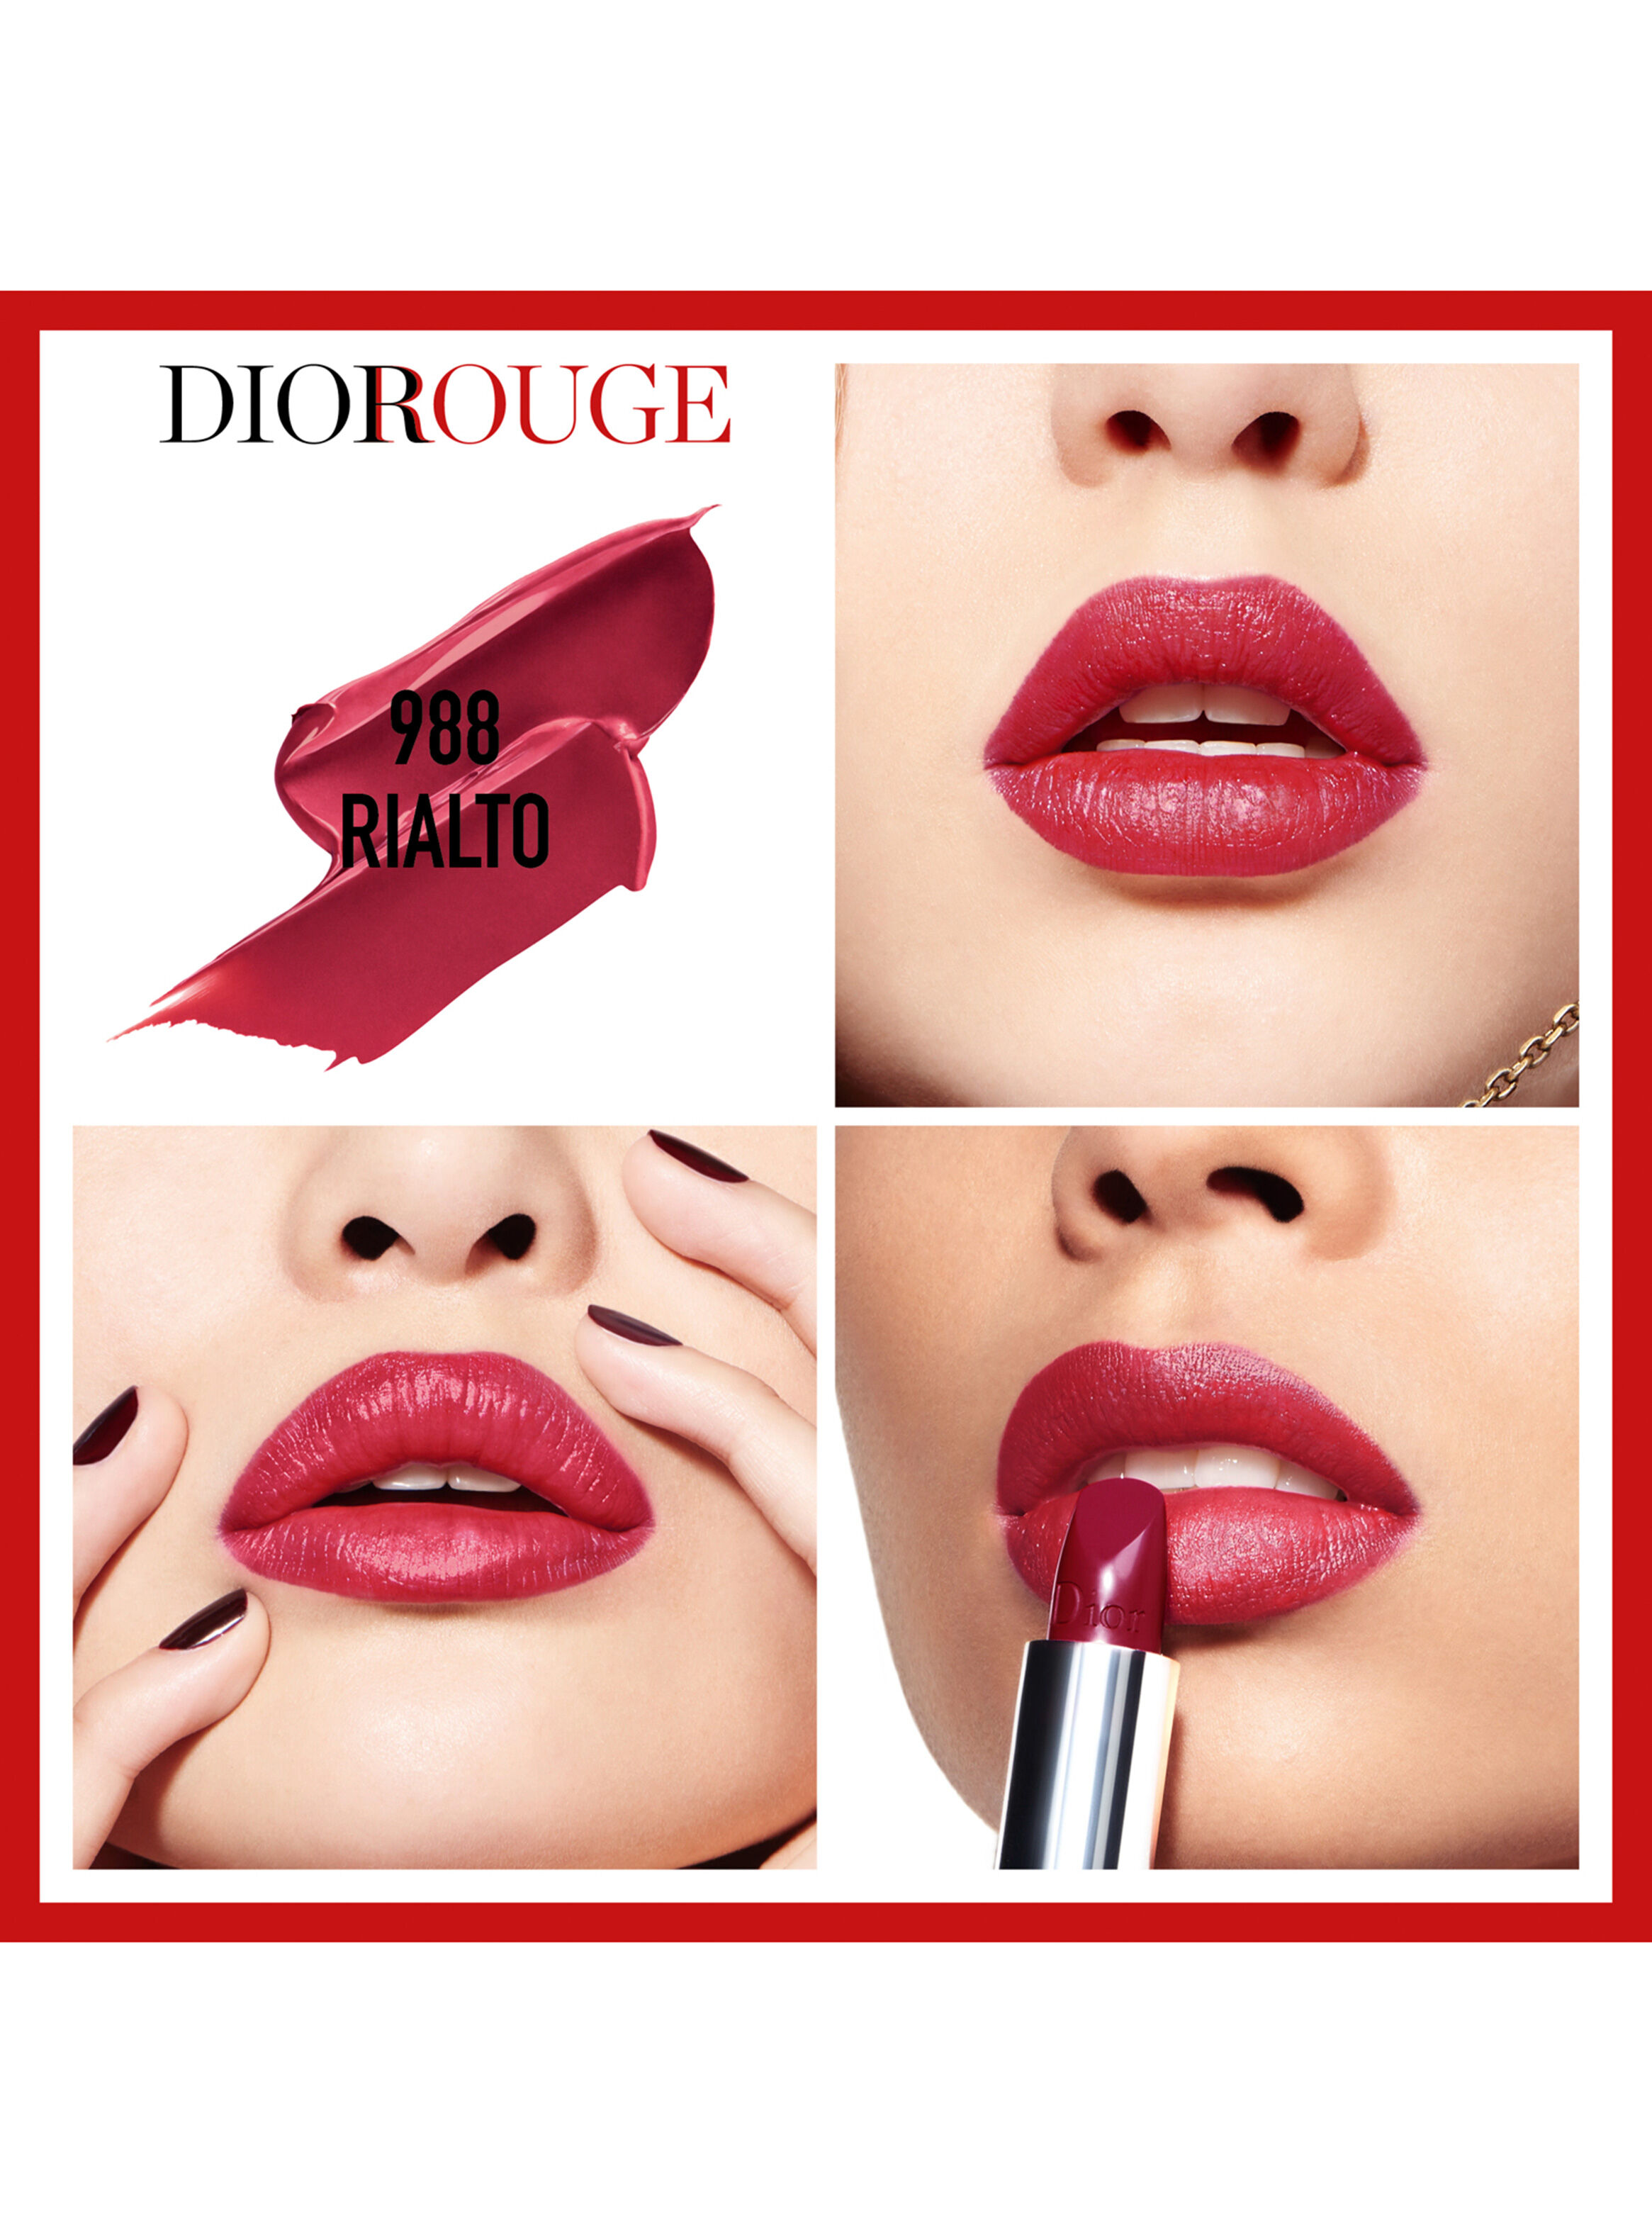 dior rouge 988